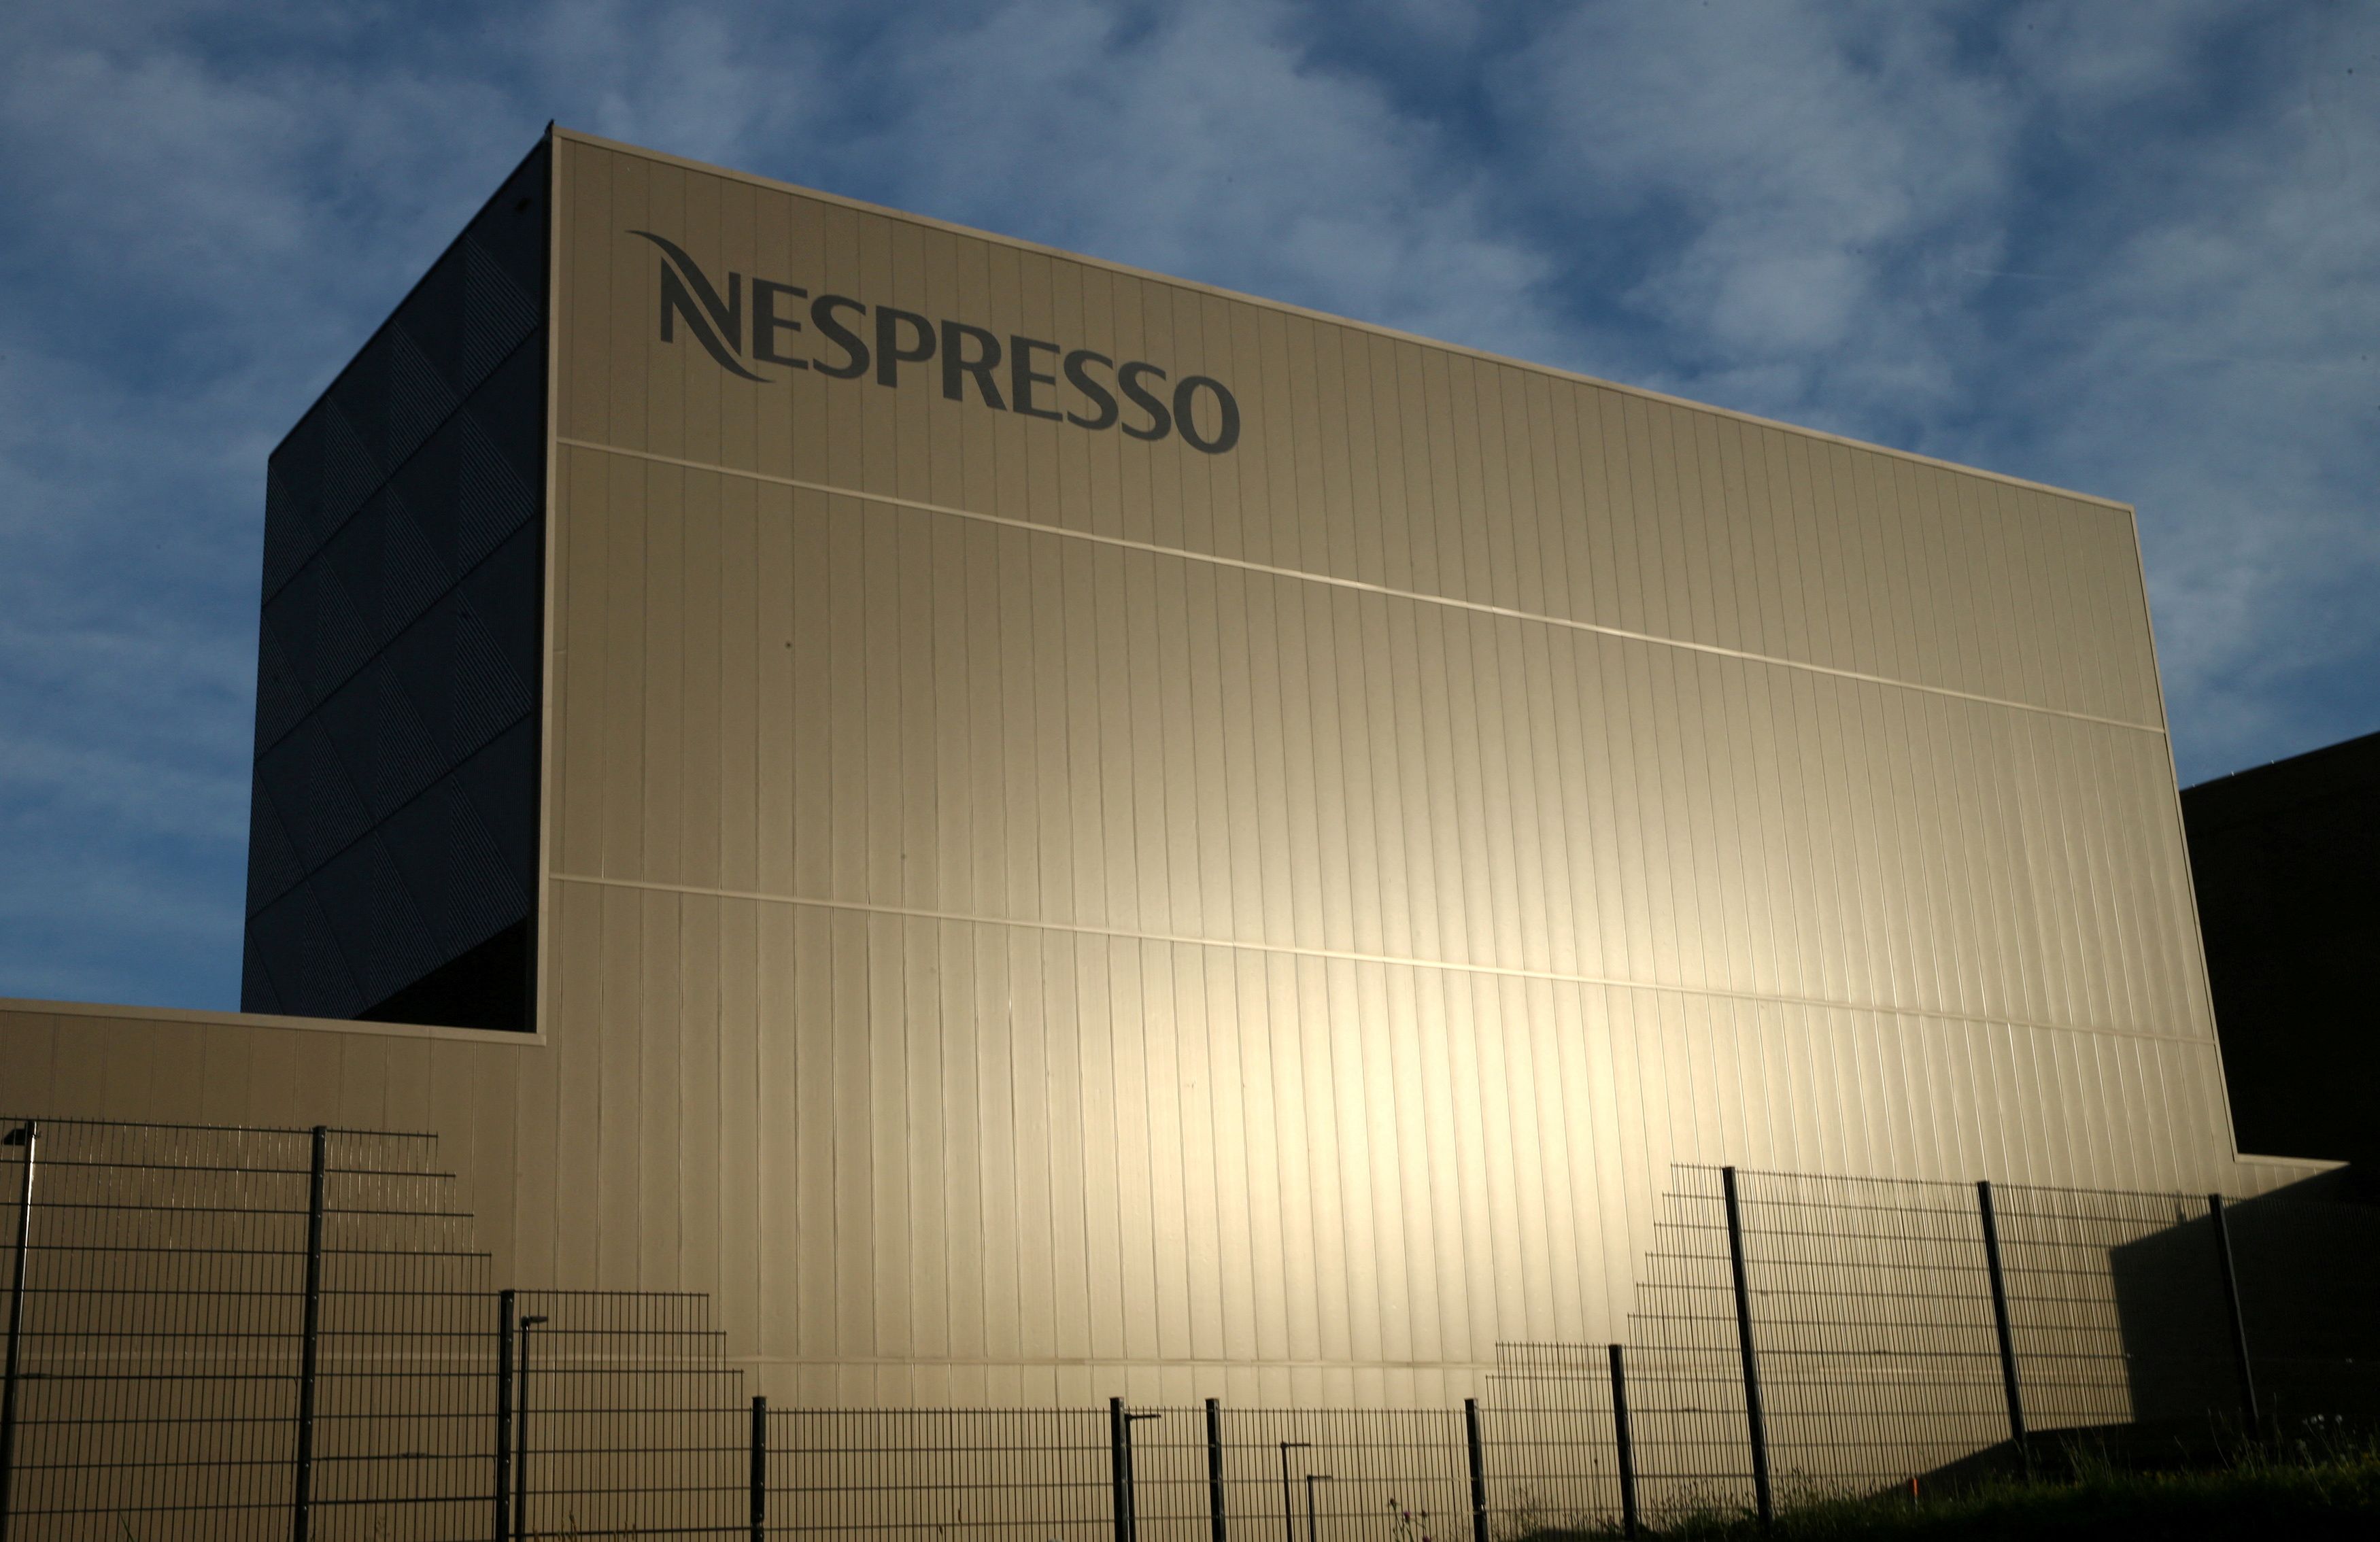 Over 500 kg of cocaine found in coffee delivery for Nespresso | Reuters